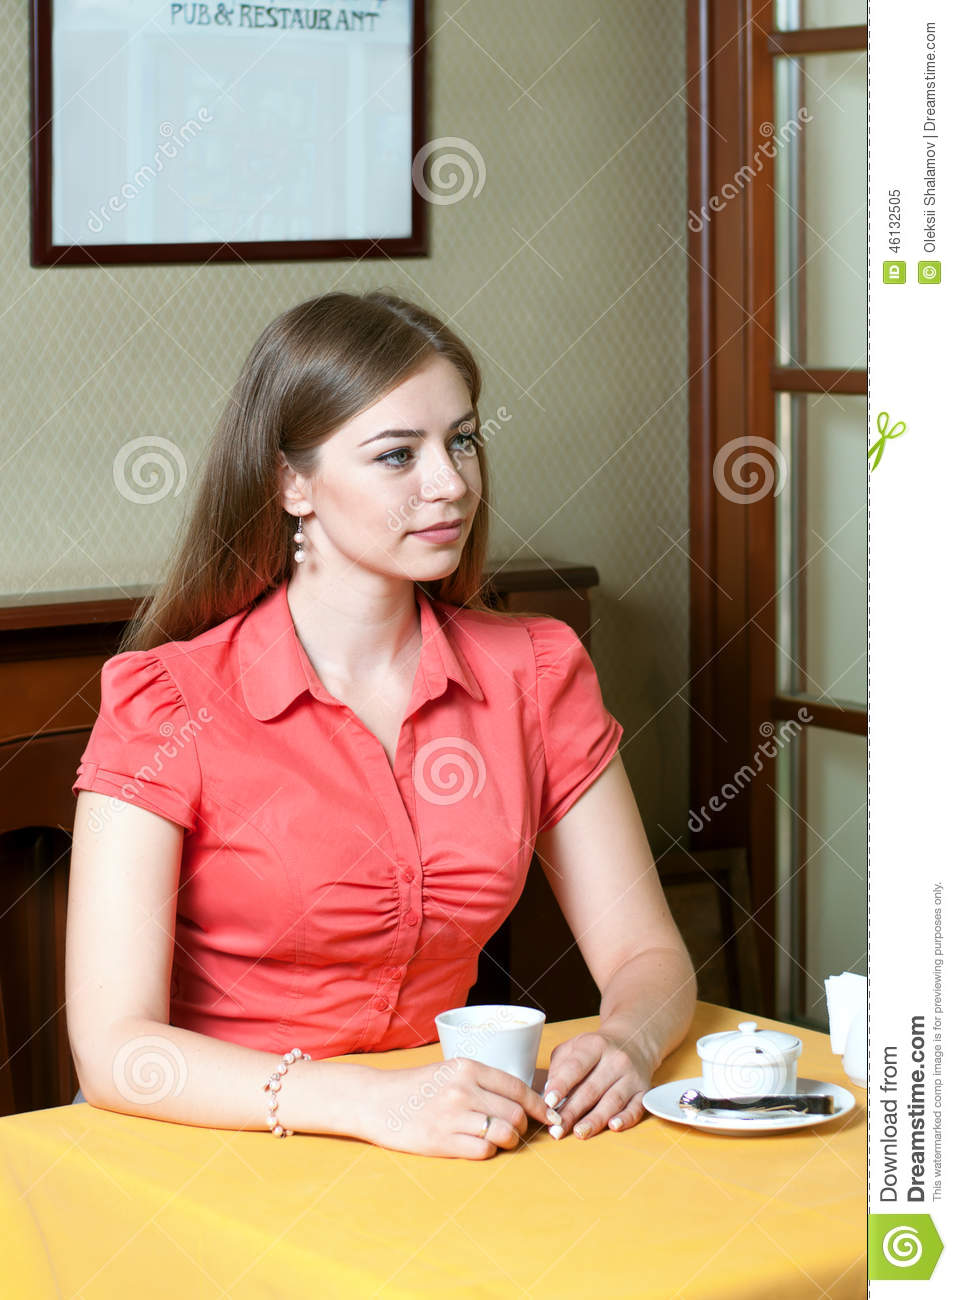 woman-sitting-restaurant-cup-coffee-looks-out-young-window-46132505.jpg